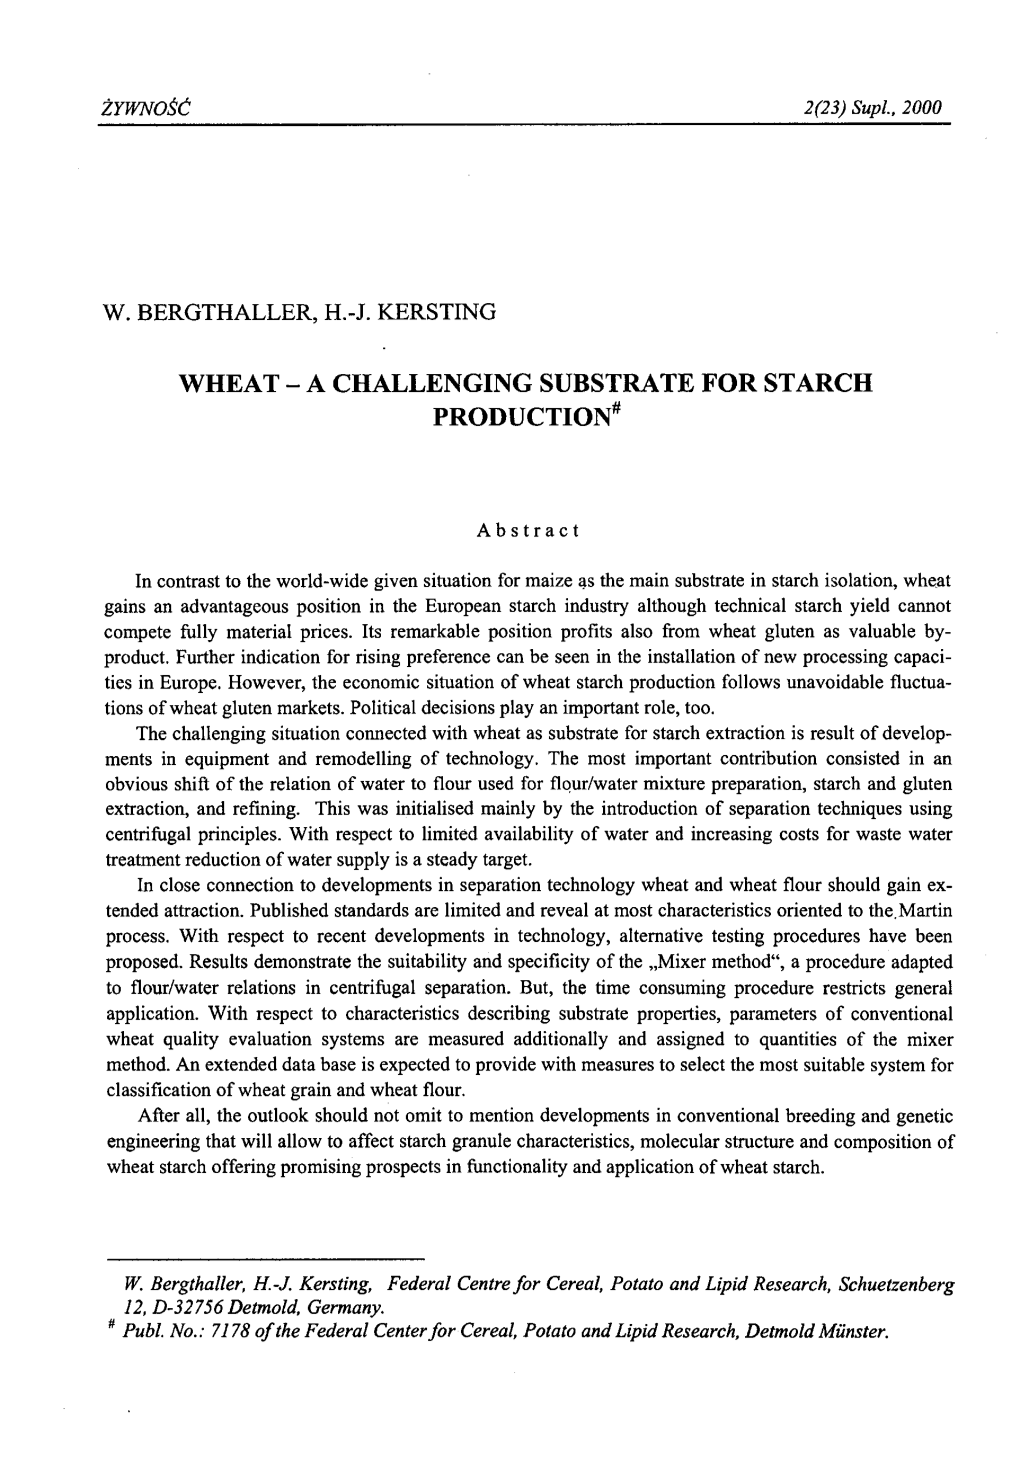 Wheat - a Challenging Substrate for Starch Production